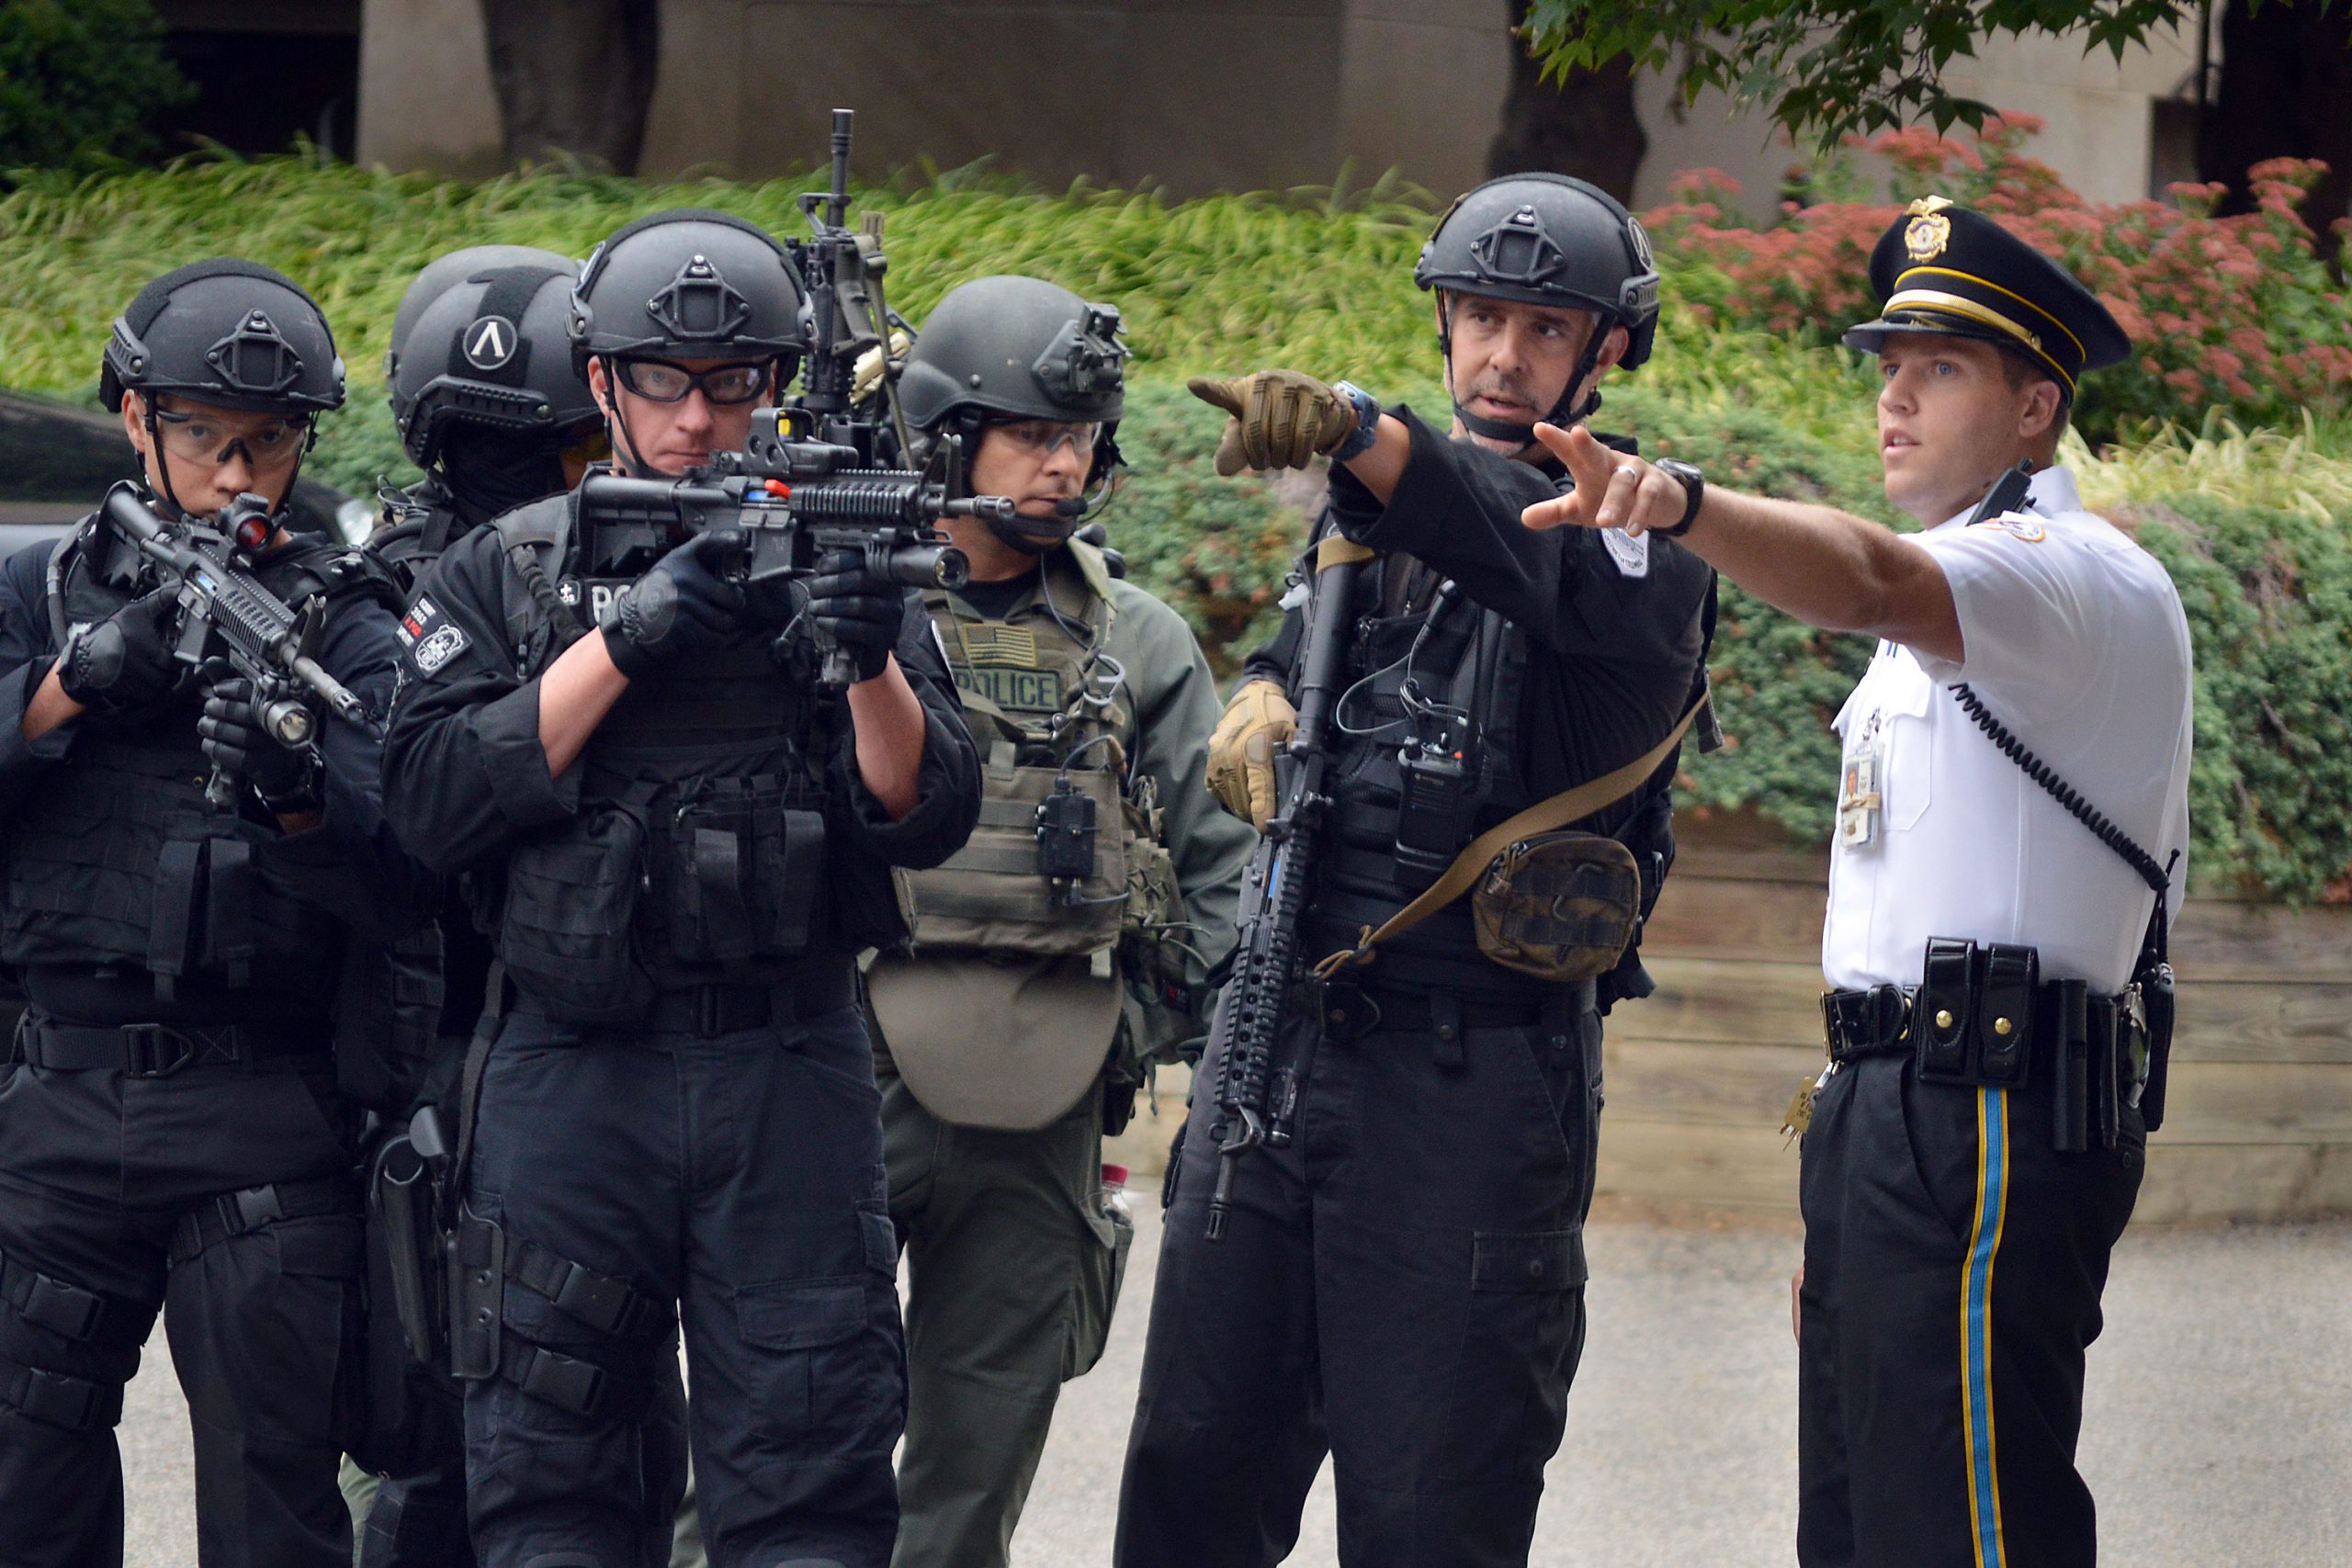 Security Officers with weapons standing outside of building and pointing